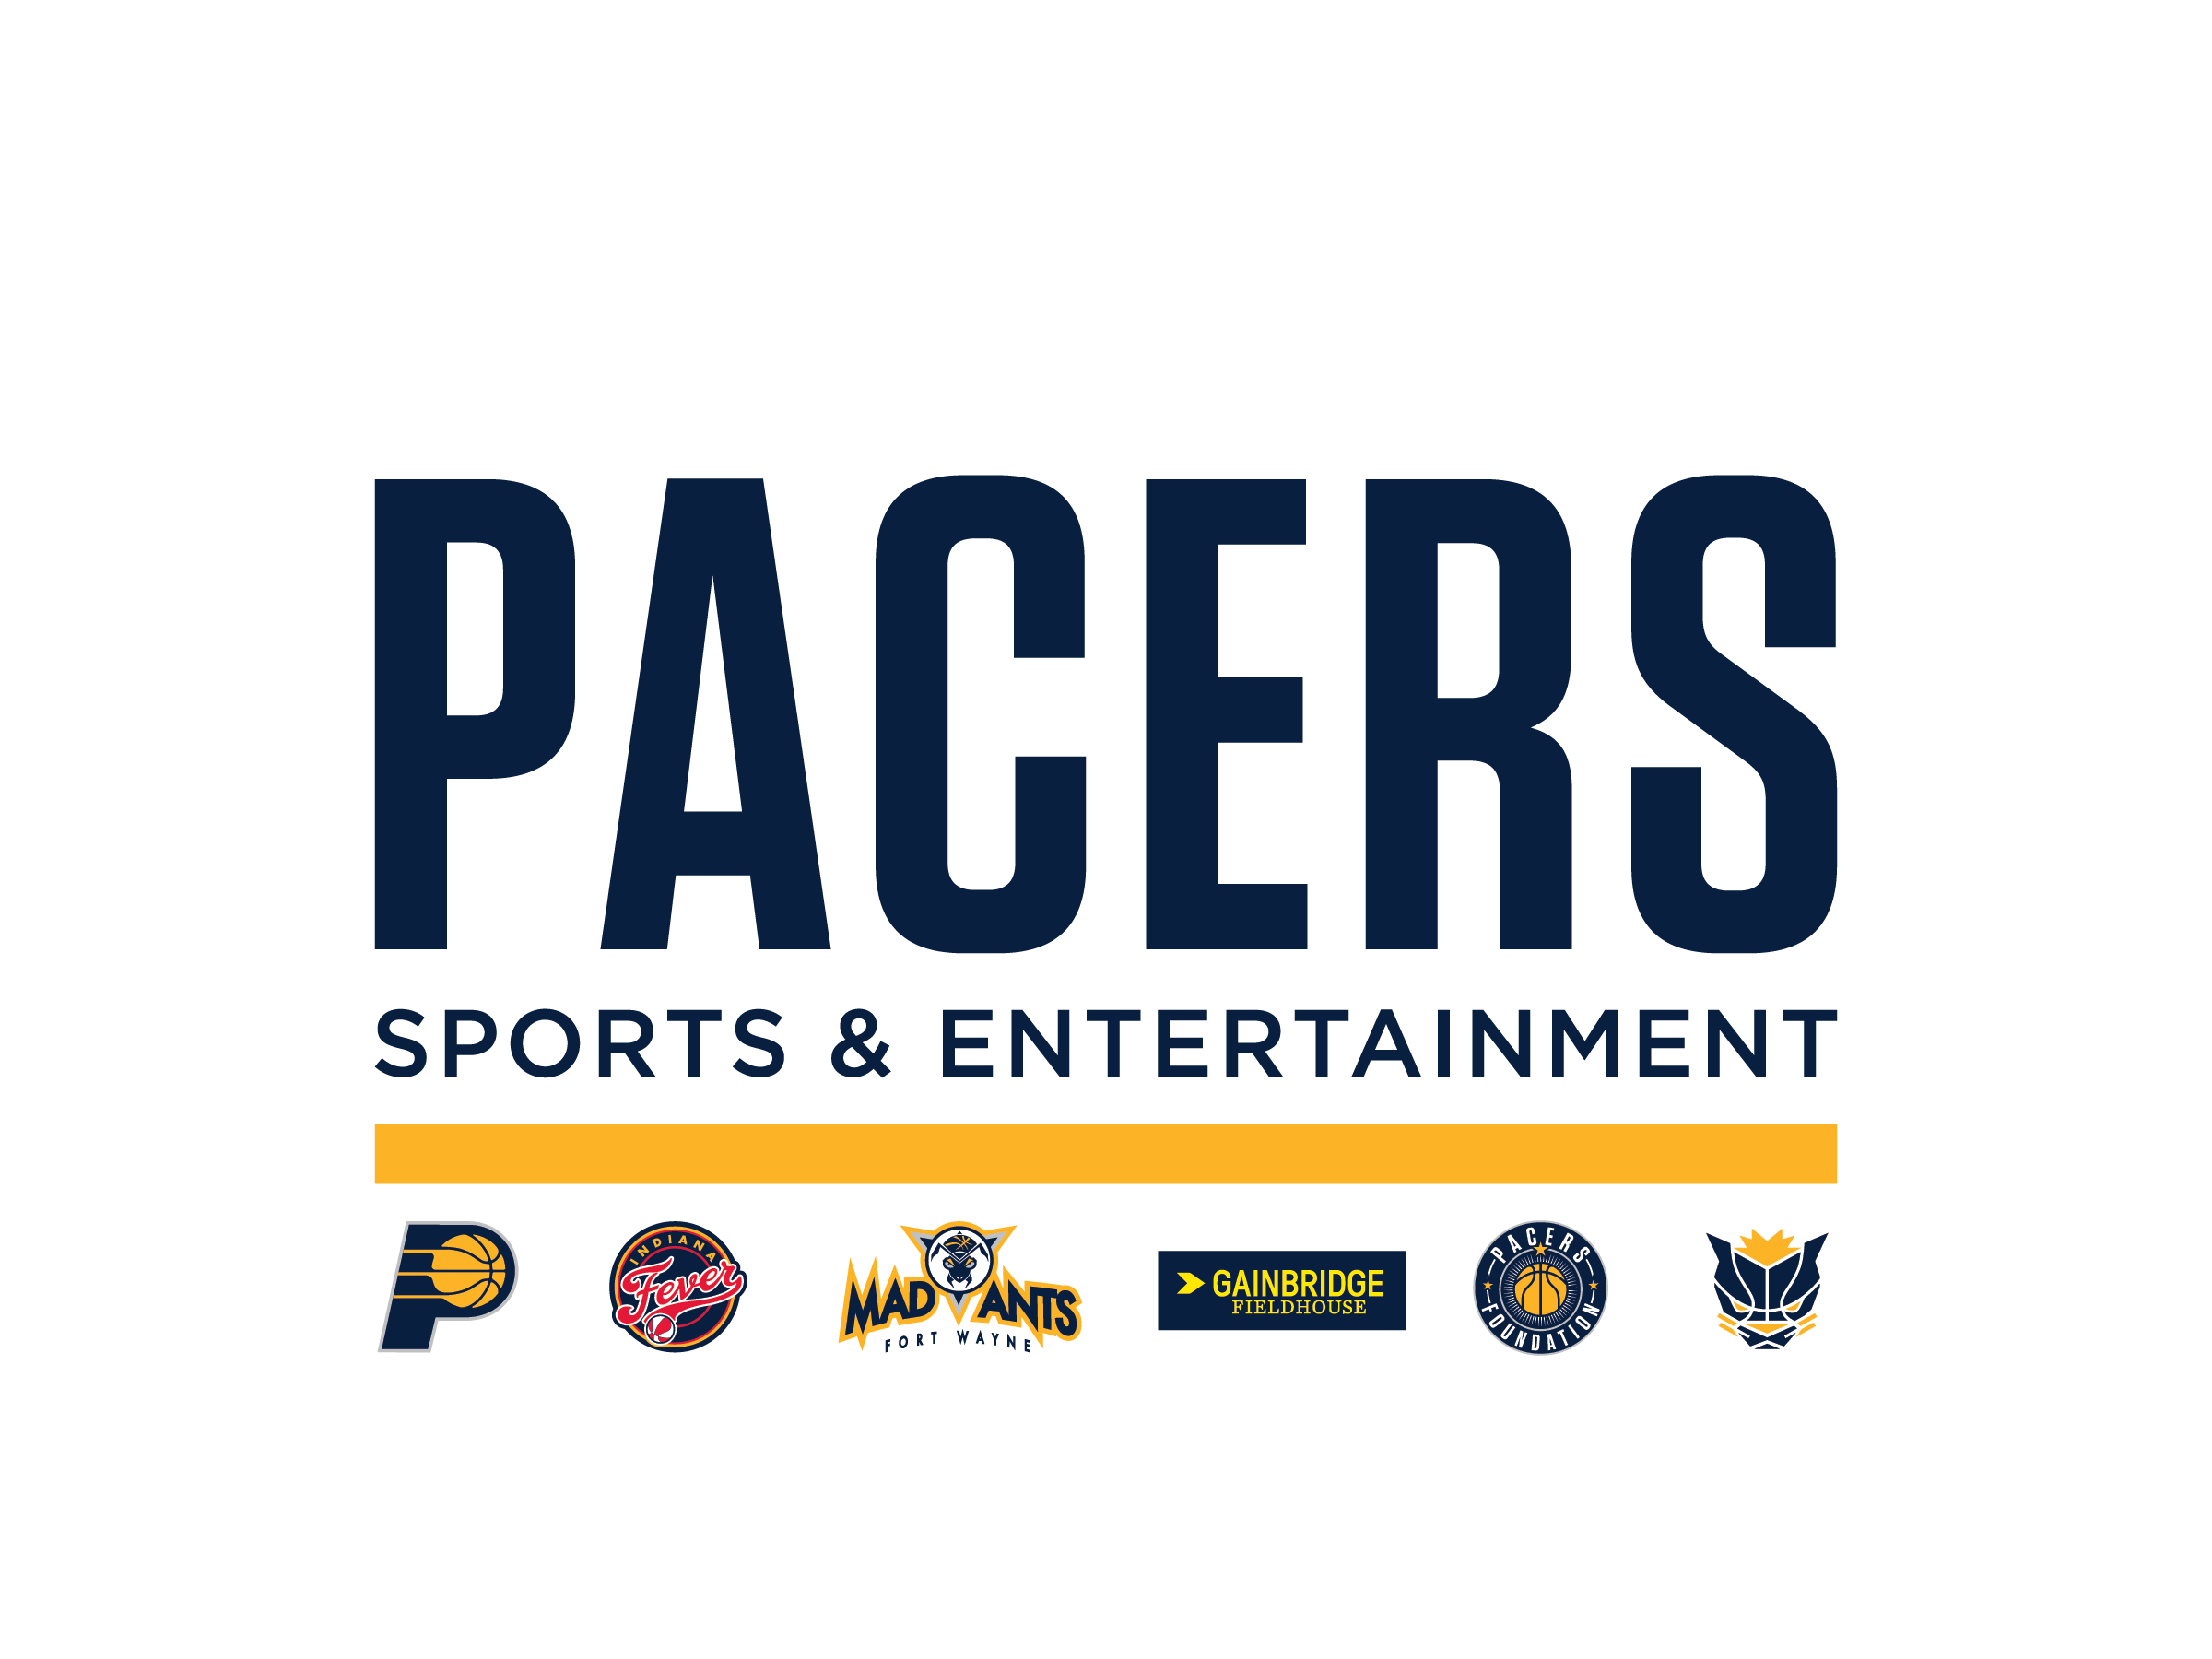 Pacers Sports and Entertainment